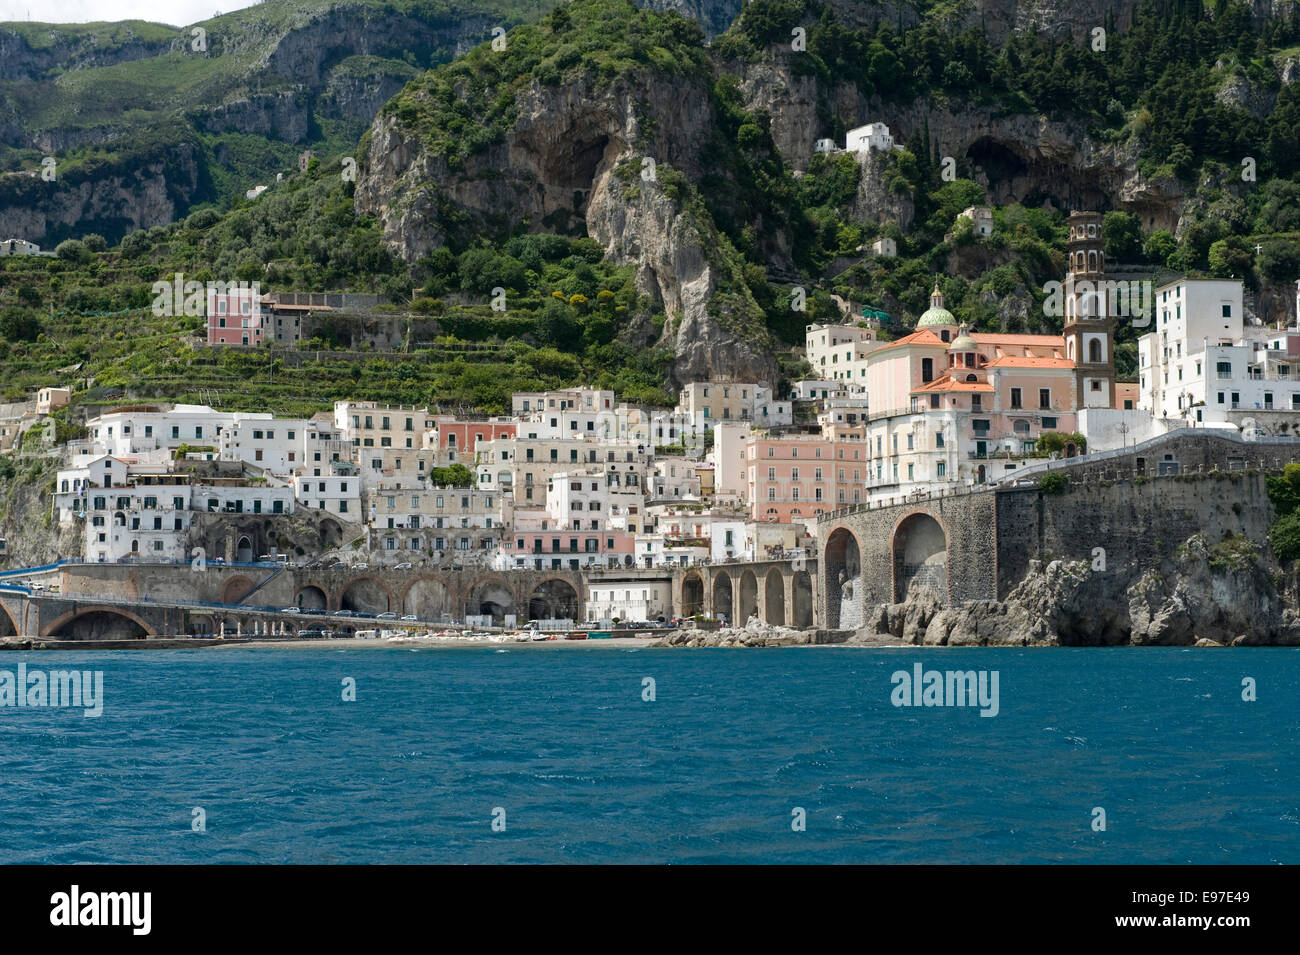 The town of Atrani near Amalfi seen from a boat on the Bay of Salerno, Province of Salerno,  Campania, Italy May Stock Photo